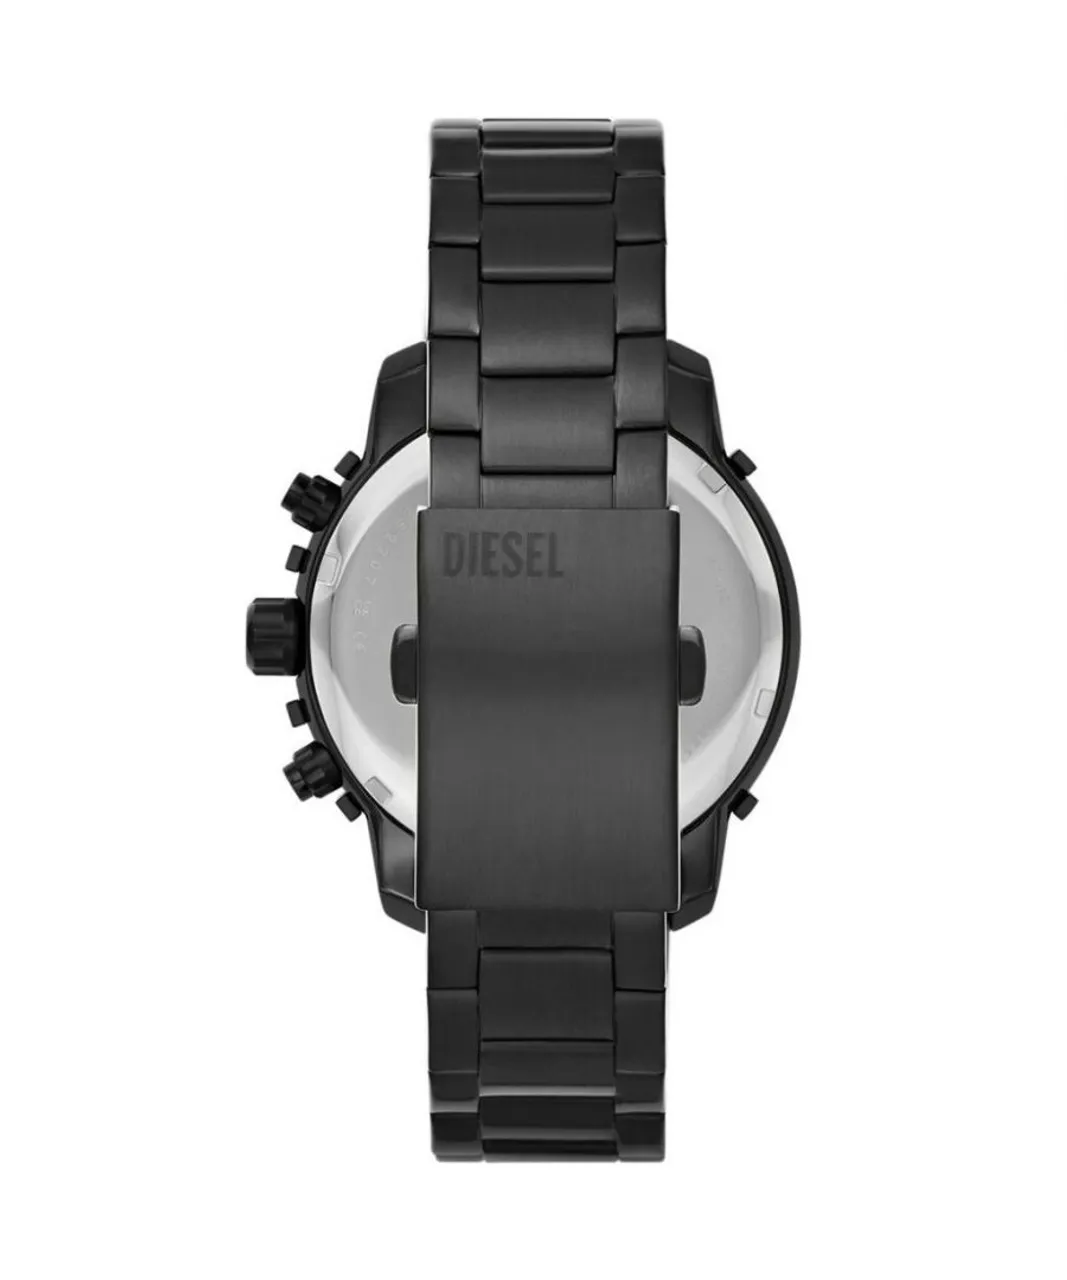 Diesel Griffed Mens Black Watch DZ4605 Stainless Steel (archived) - One Size